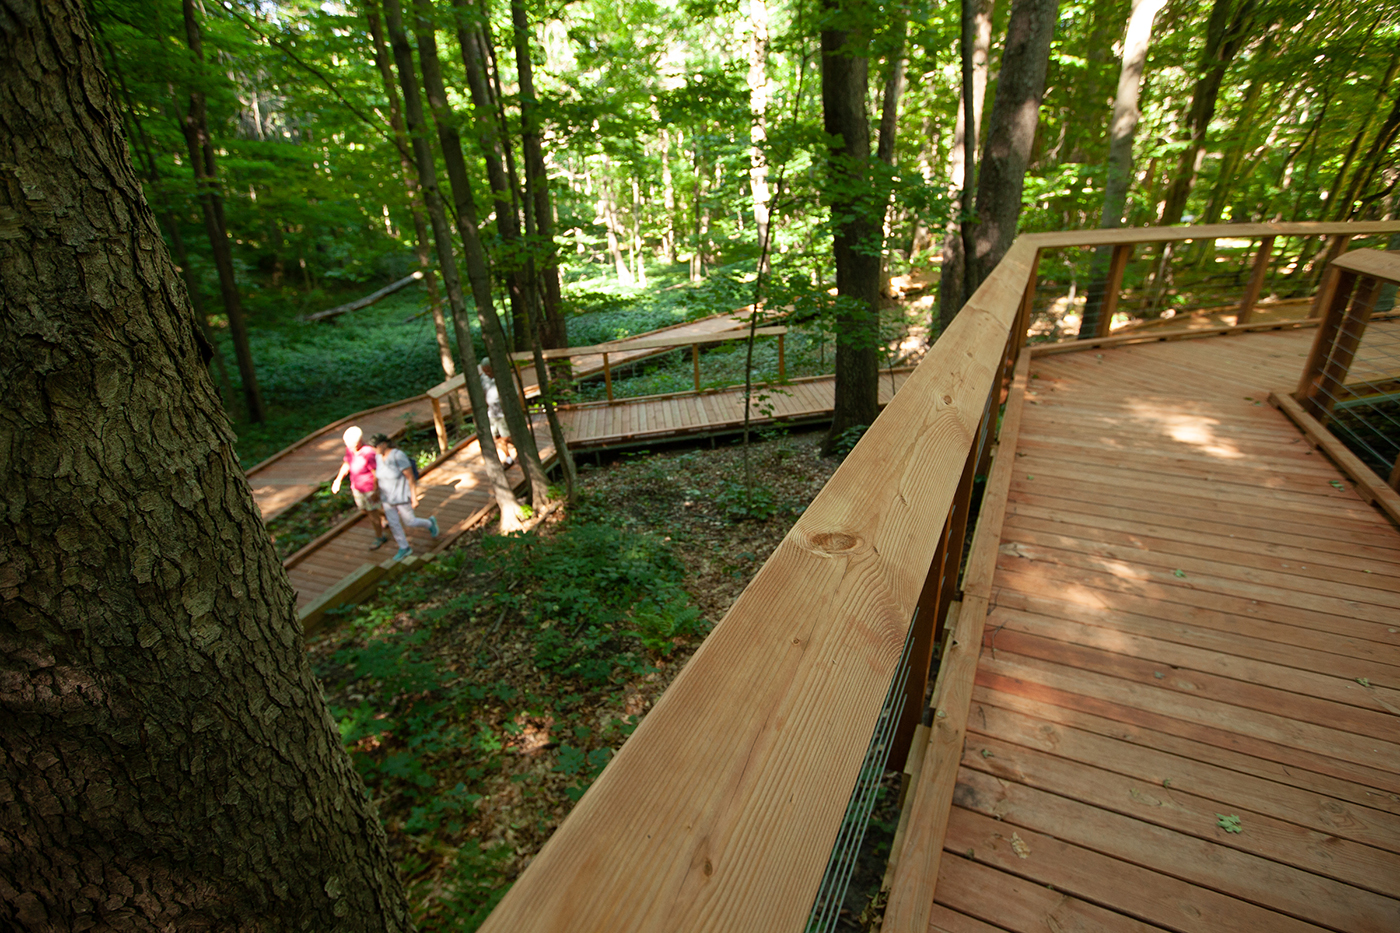 The Overlook Trail features a series of switchbacks, which were designed to minimize the impact on the forest.